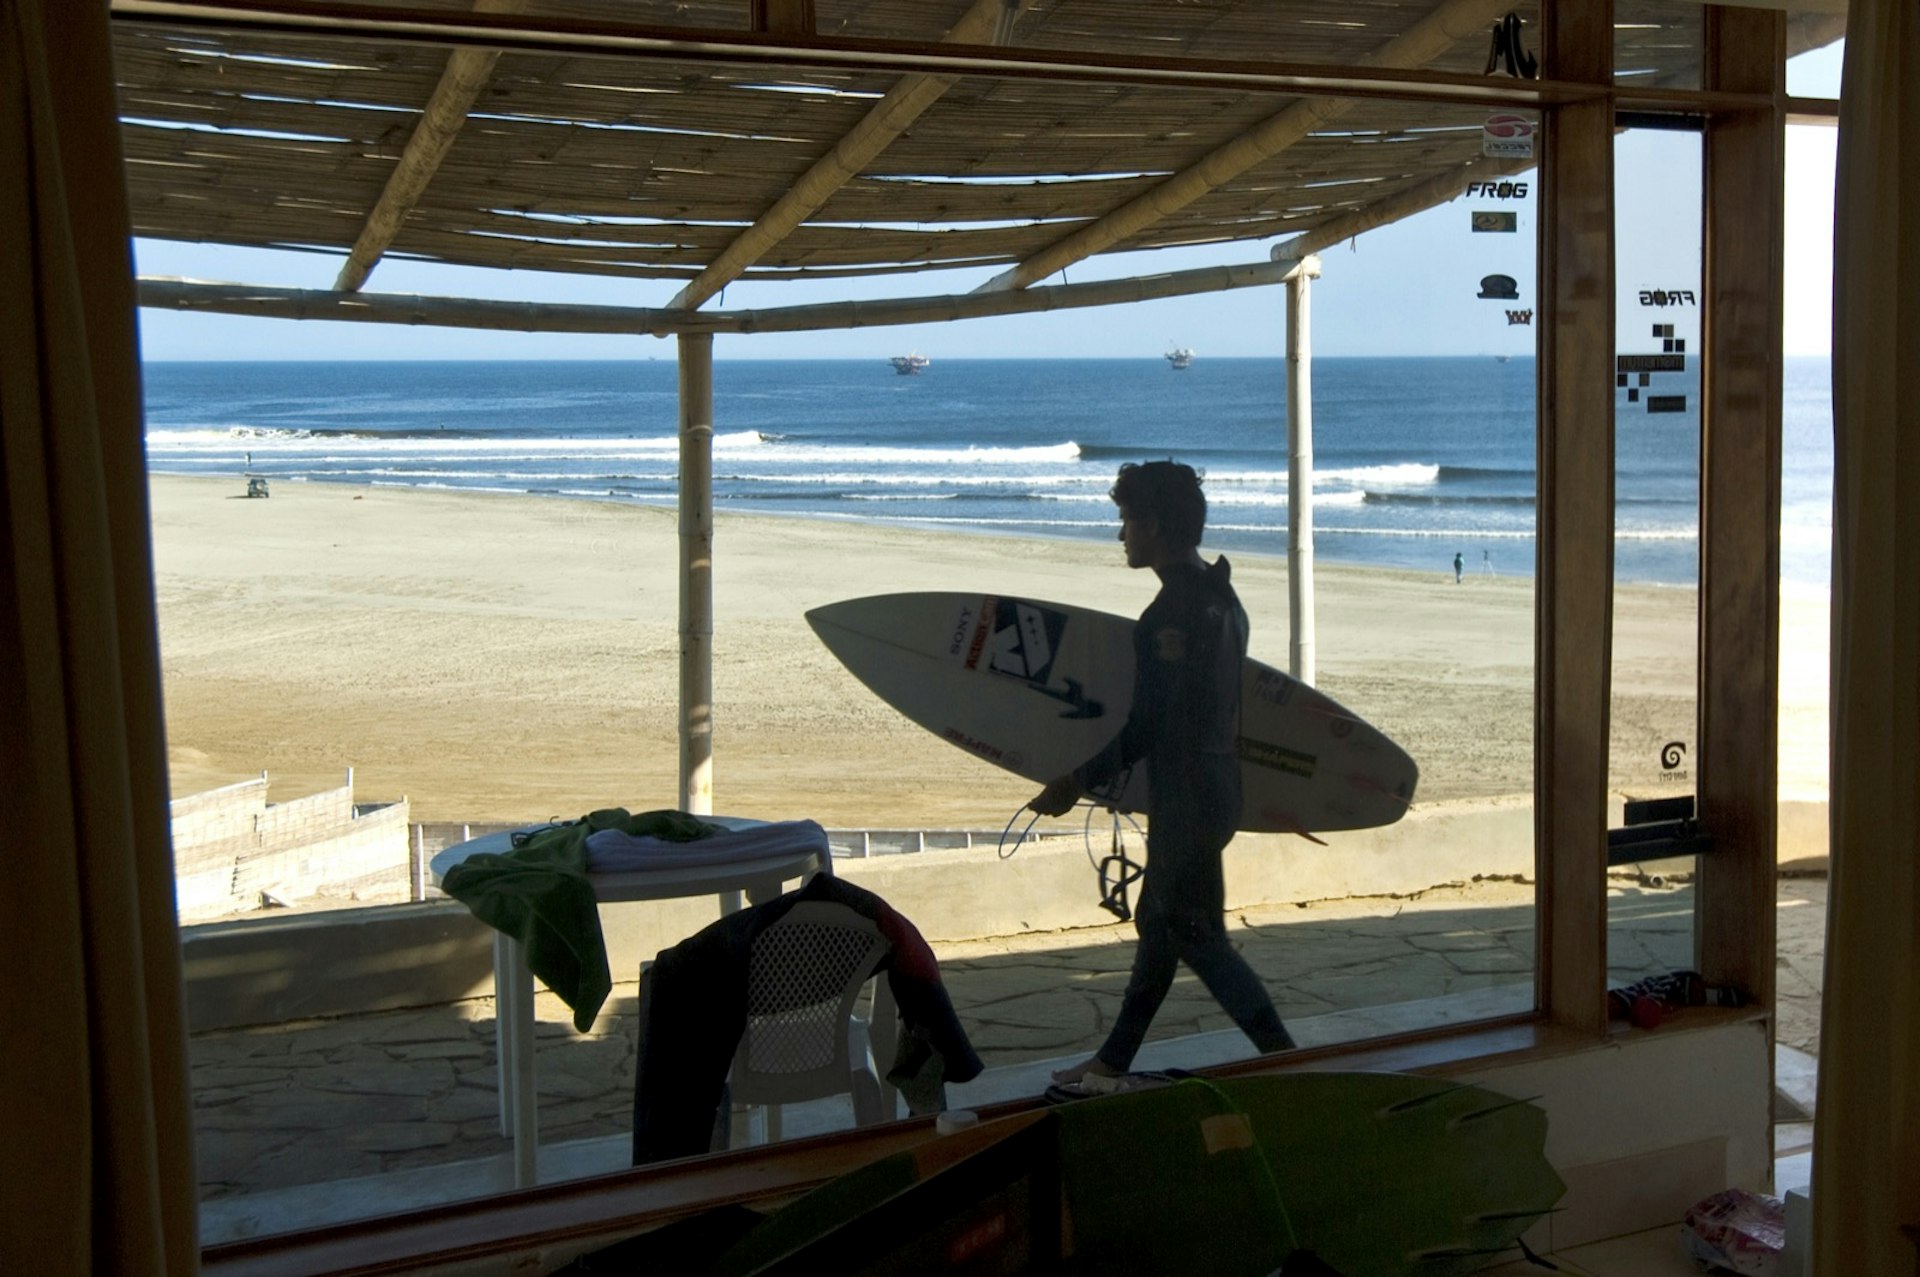 A person carries a surfboard across a shady porch at a cabin or cabana situated right on a beach